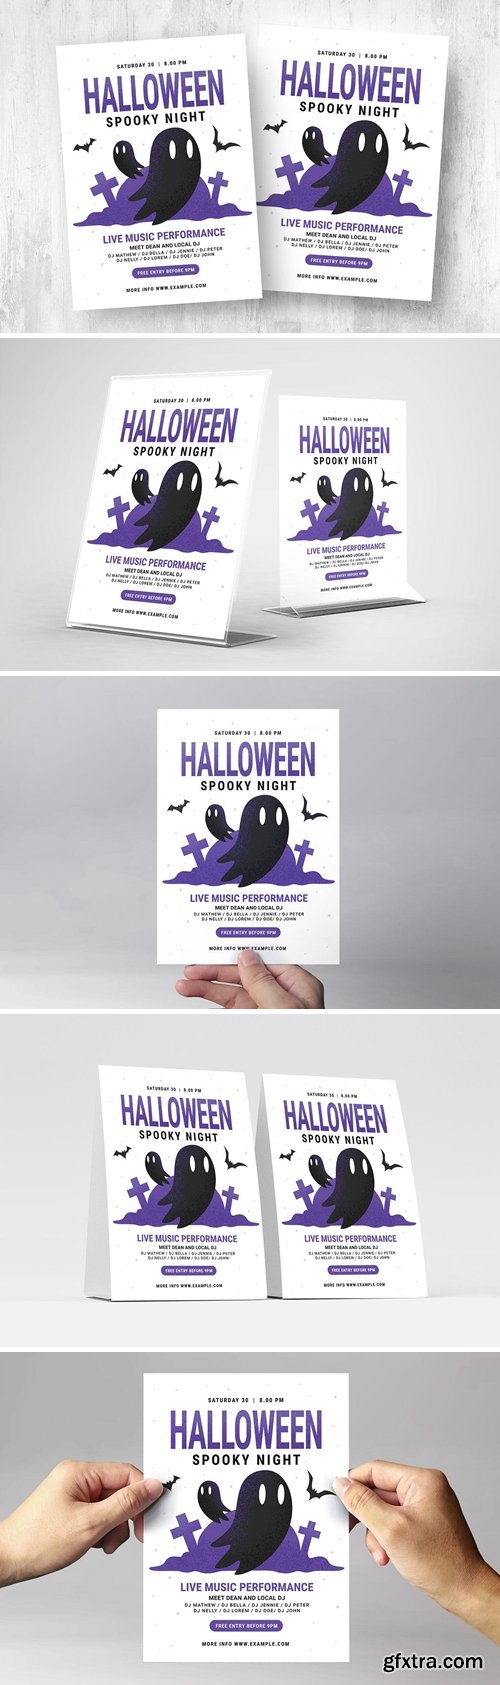 Simple Halloween Flyer with Ghost Illustrations